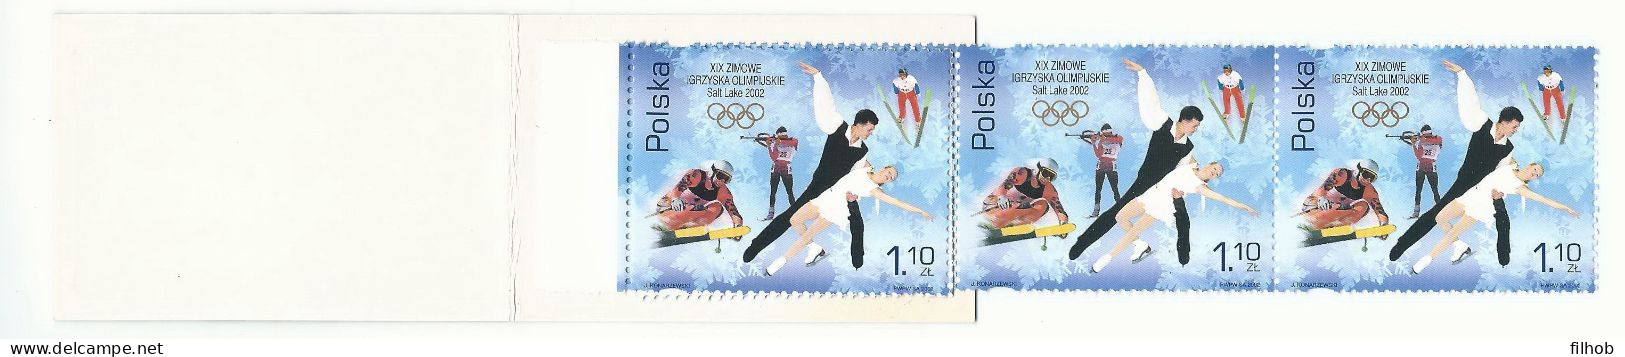 Poland Stamps (1046): MNH ZC.3802 Sport Olympic Games Salt Lake City (stamp Notebook) - Unused Stamps